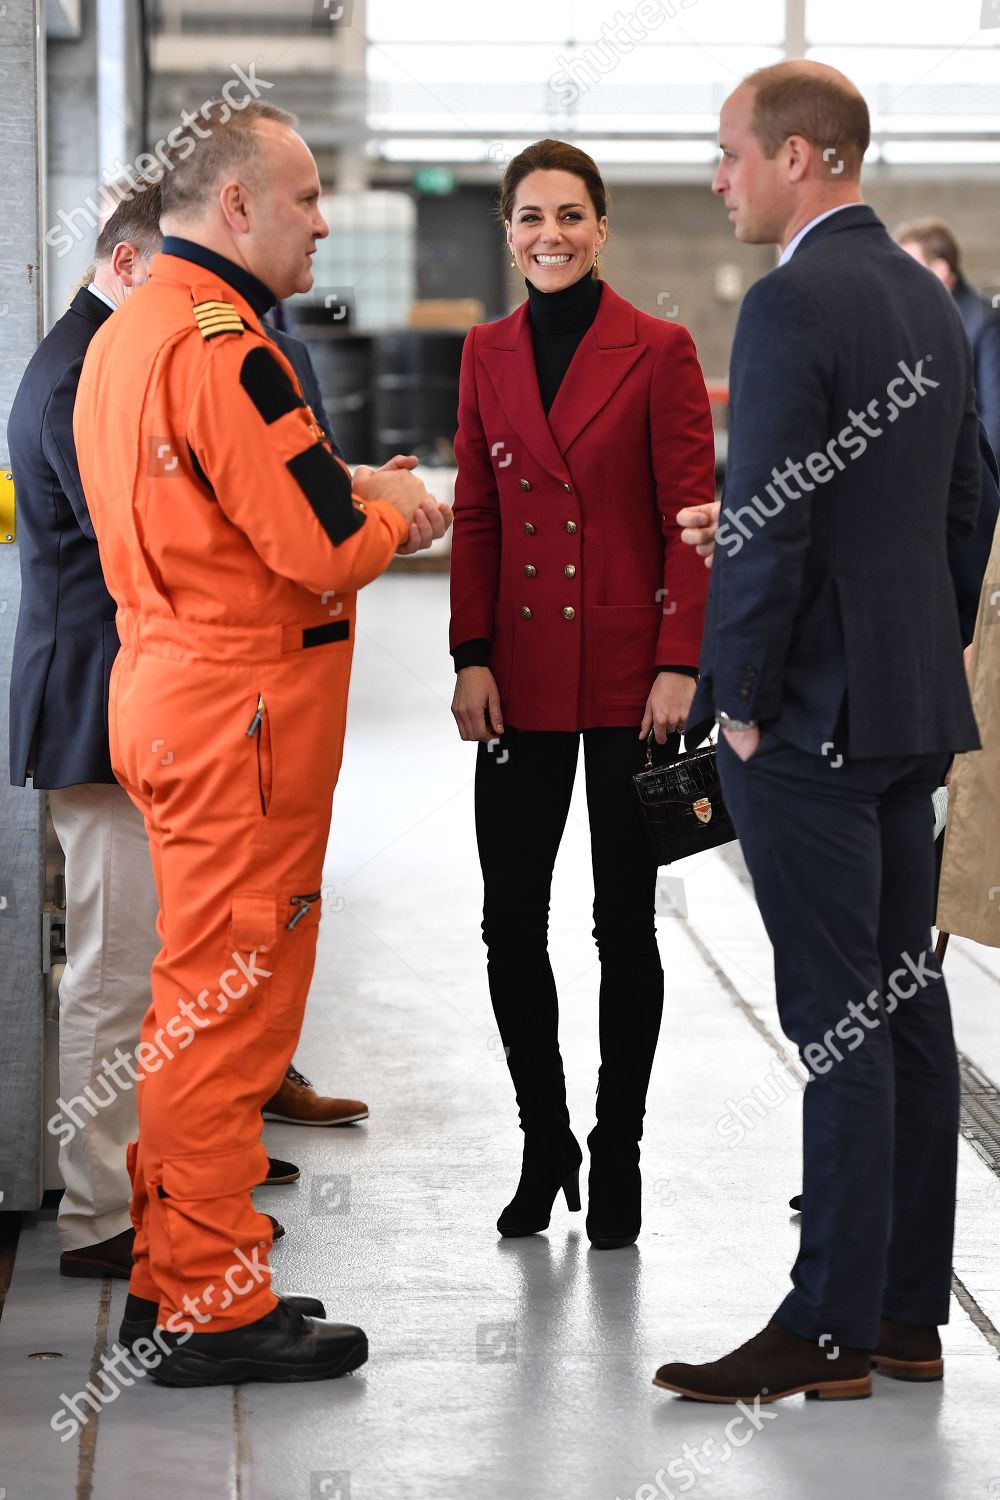 prince-william-and-catherine-duchess-of-cambridge-visit-to-wales-uk-shutterstock-editorial-10231454o.jpg